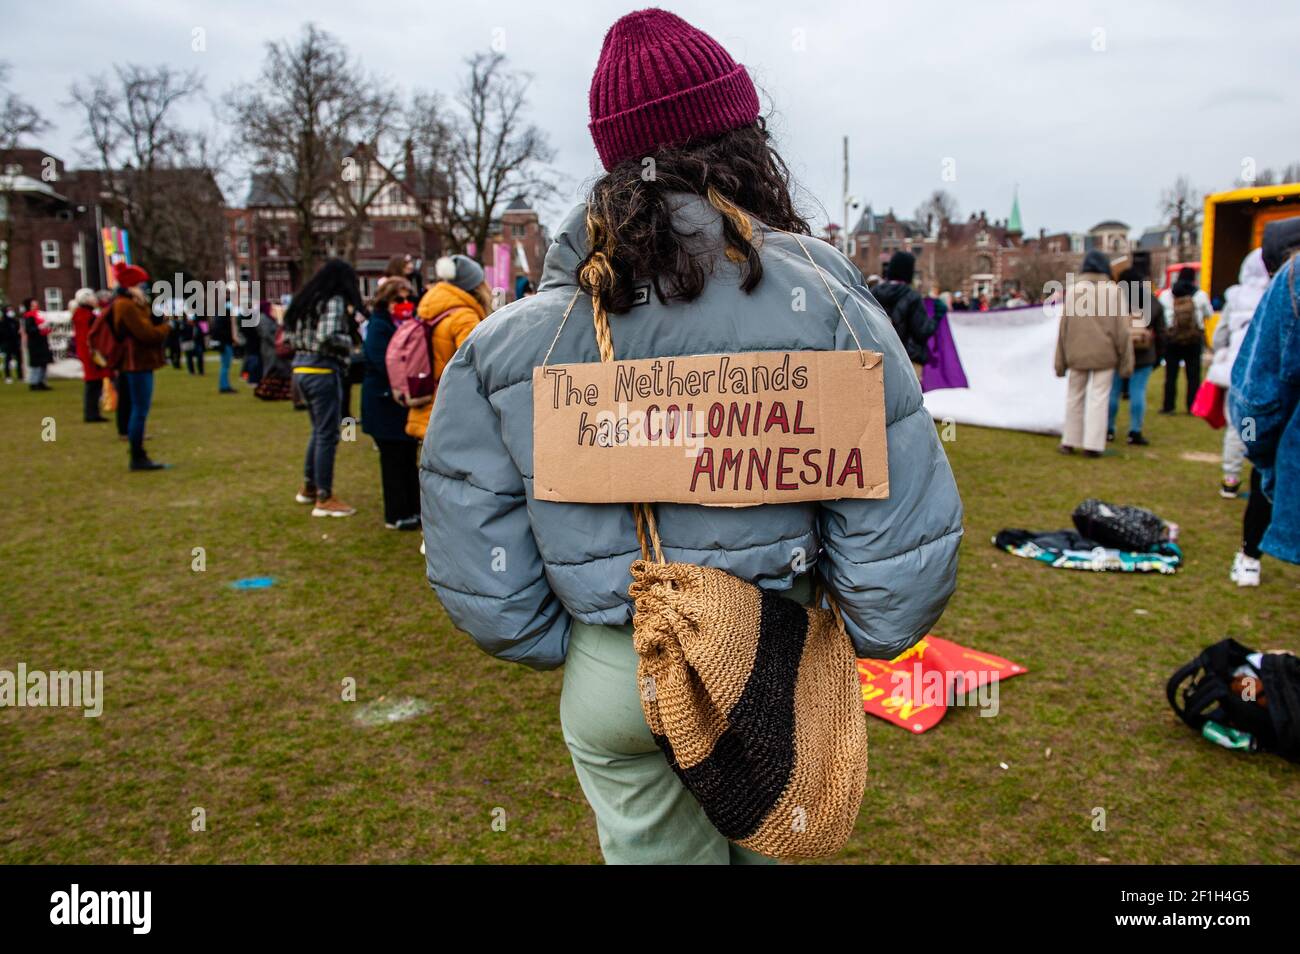 A woman is seen wearing a placard on her back during the march.The event was organized by '8 maartcomité', an independent initiative group of active women from different organizations and backgrounds, who are committed to the organization of militant celebration of the International Women's Day in Amsterdam. At the Museumplein, hundreds of people gathered to fight for equal rights for women around the world. Stock Photo